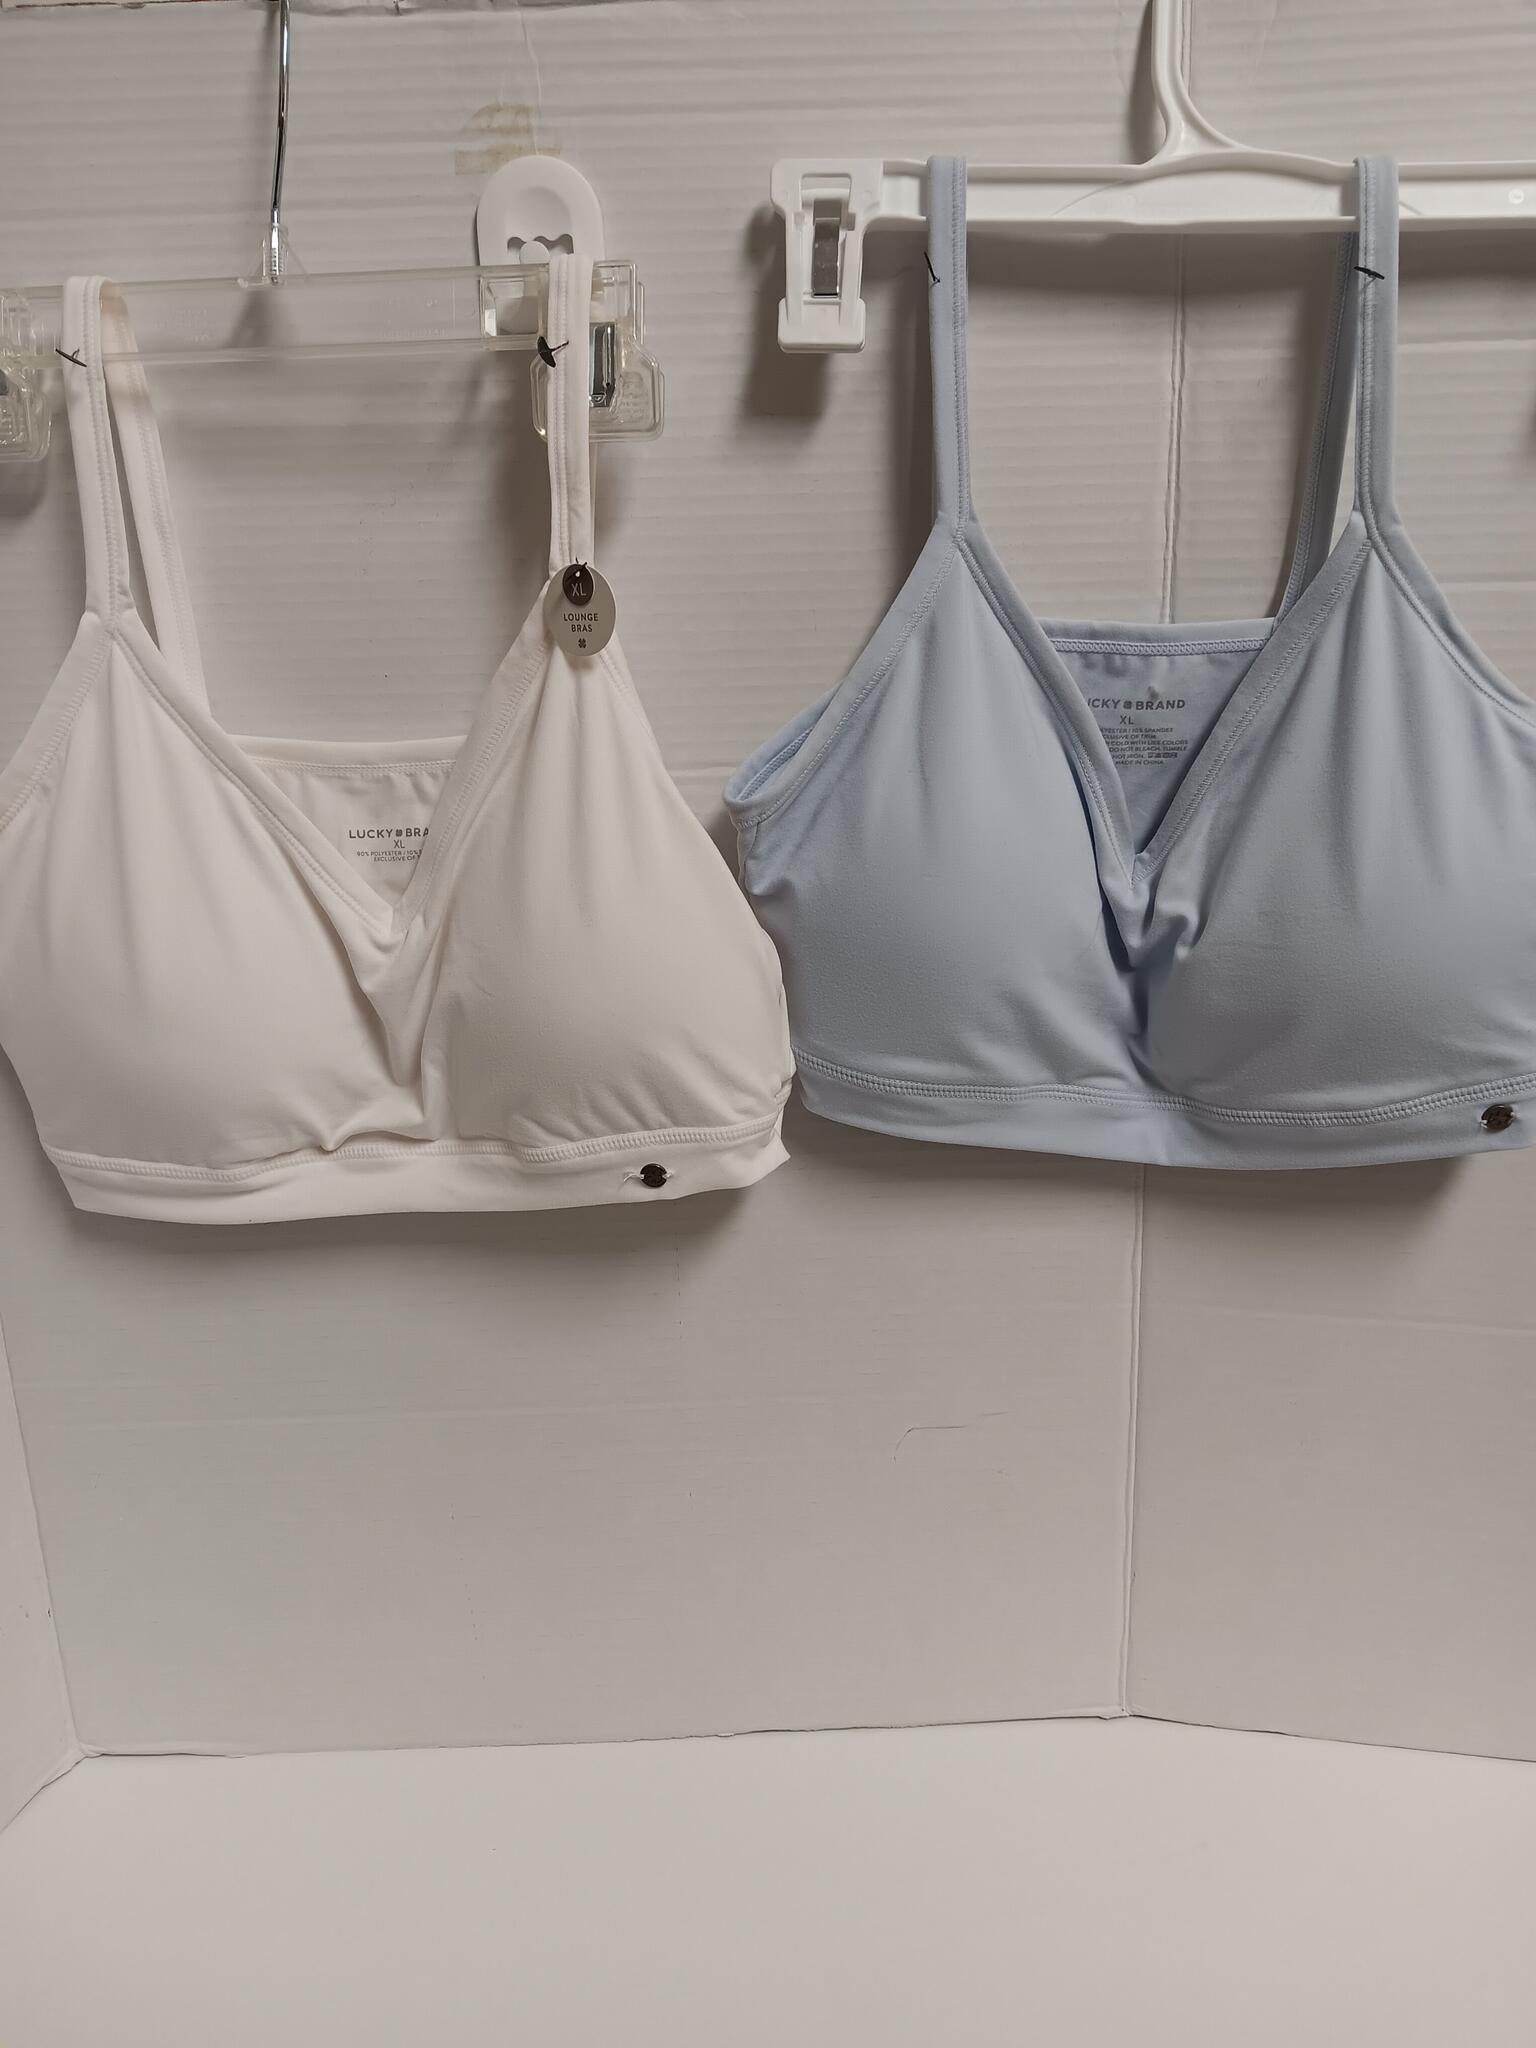 Lucky Brand Lounge Bras Ivory/Light Blue Size XL New (2 Pair) for